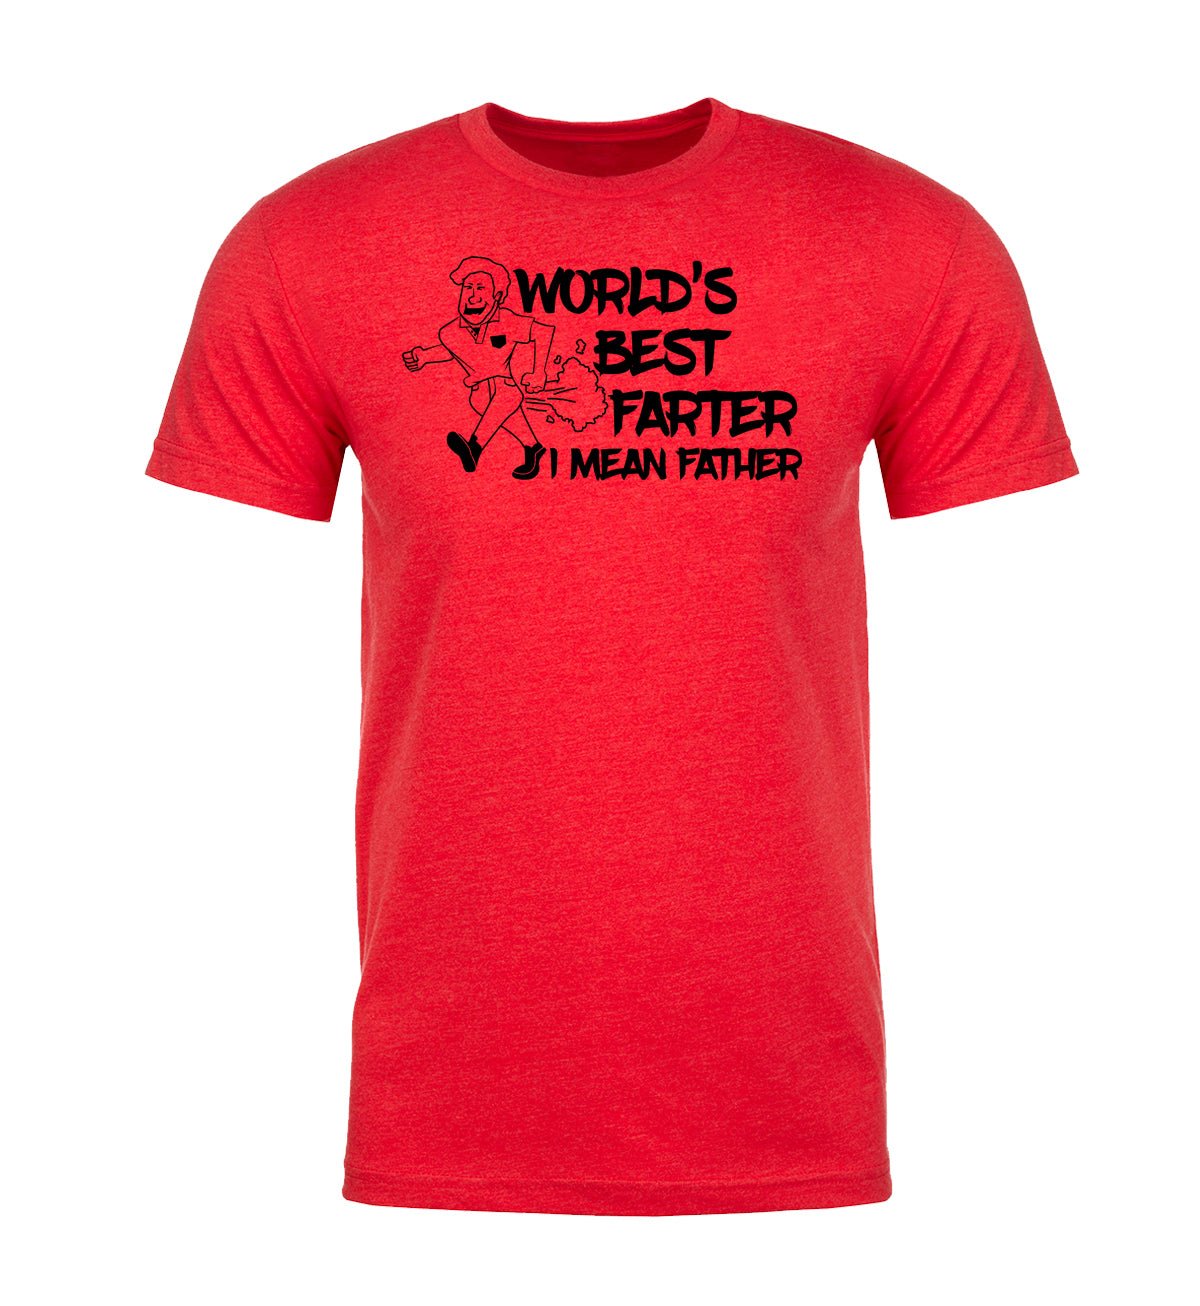 World's Best Farter - I Mean Father Unisex T Shirts - Mato & Hash